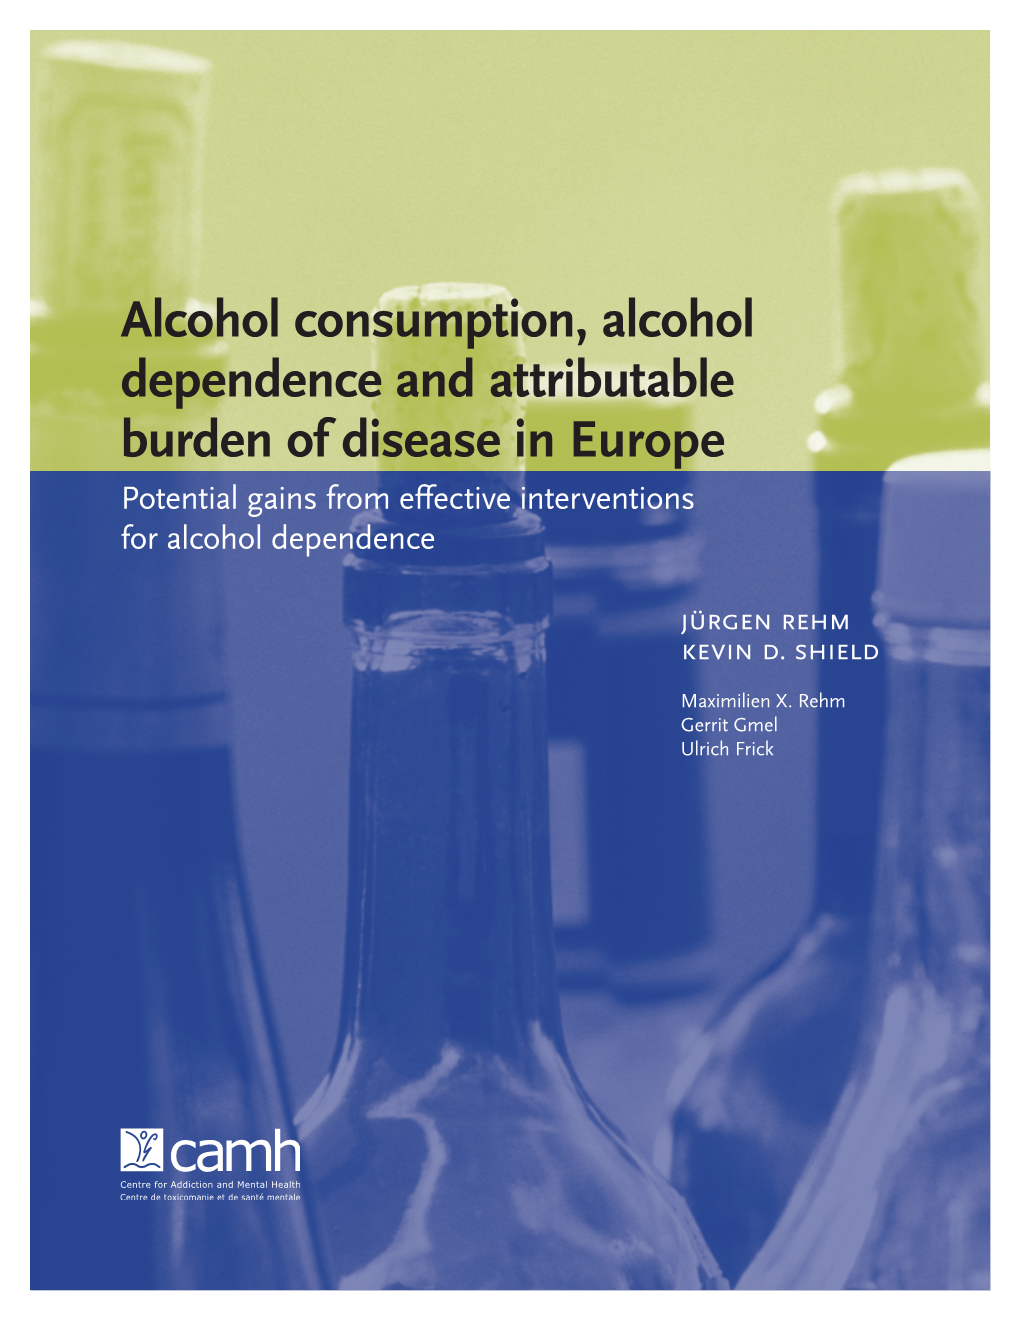 Alcohol-Attributable Burden of Disease for 27 European Countries in 2004